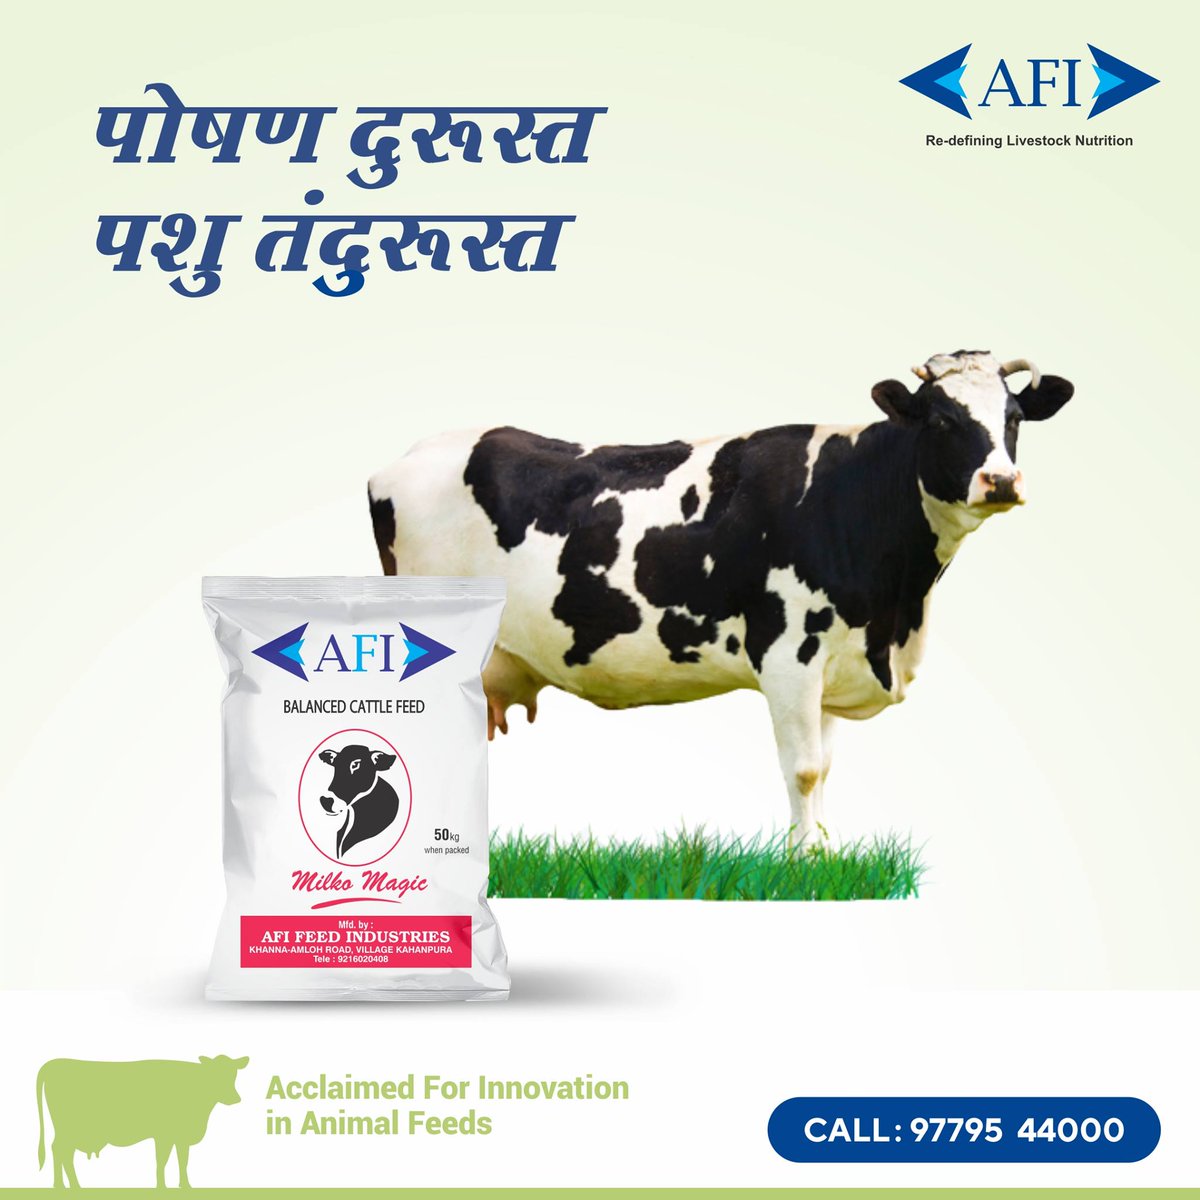 Feed your livestock with what is best for their wellbeing and production. Choose Balanced Life, Balanced Diet.
#Dairy #Feed #AnimalFeed #AnimalHealth #MilkProduction #AnimalNutrition #Farming #IndianDairyFarmer #DairyIndustry #DairyFarmer #DairyFarming #Milk #Agriculture